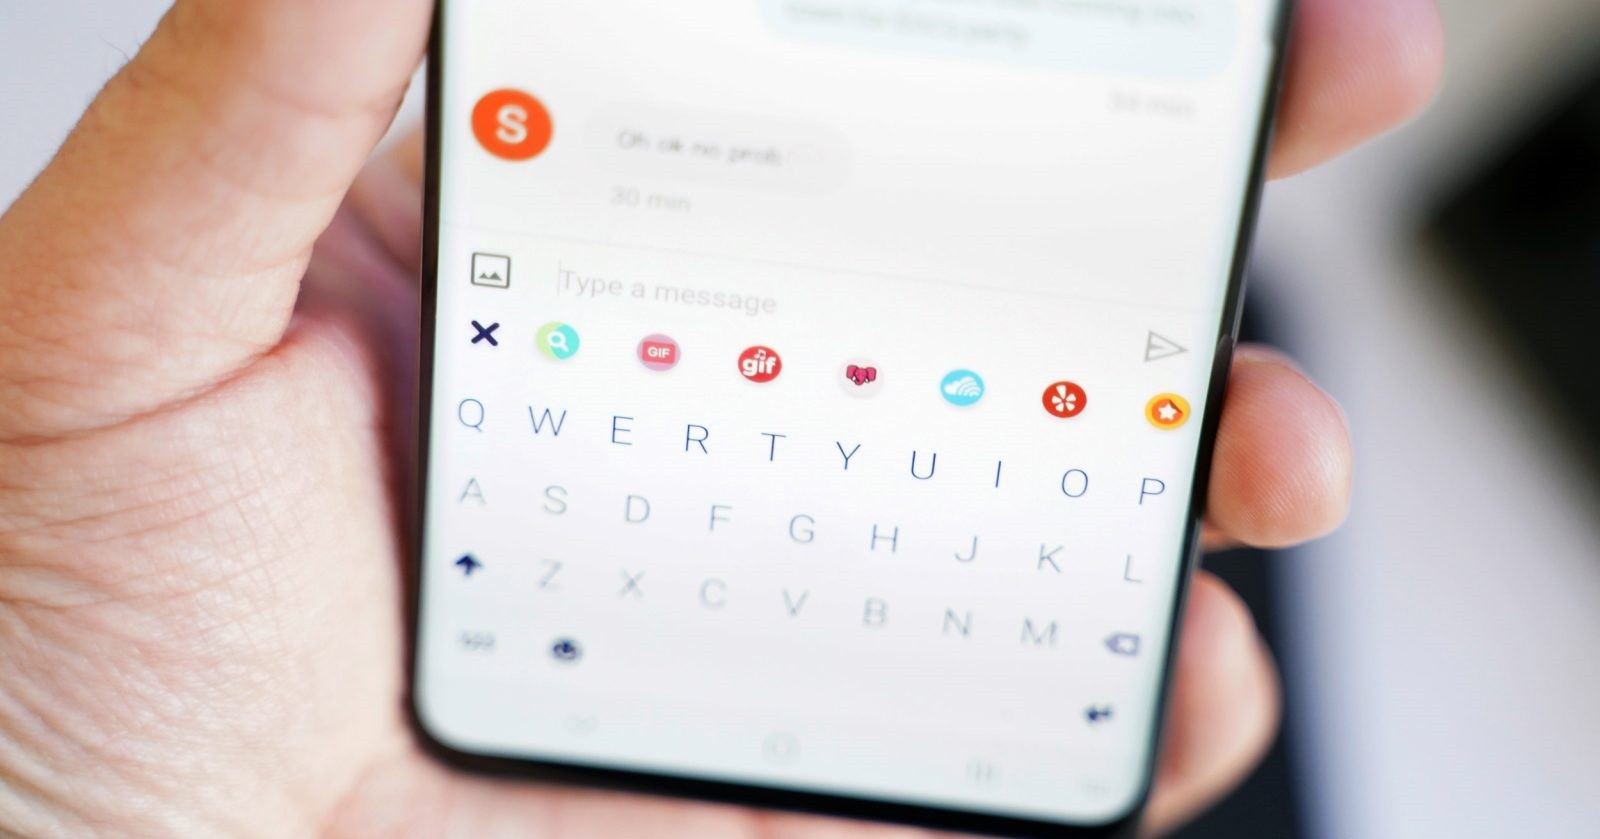 How to type faster on the cell phone keyboard without seeing using Fleksy